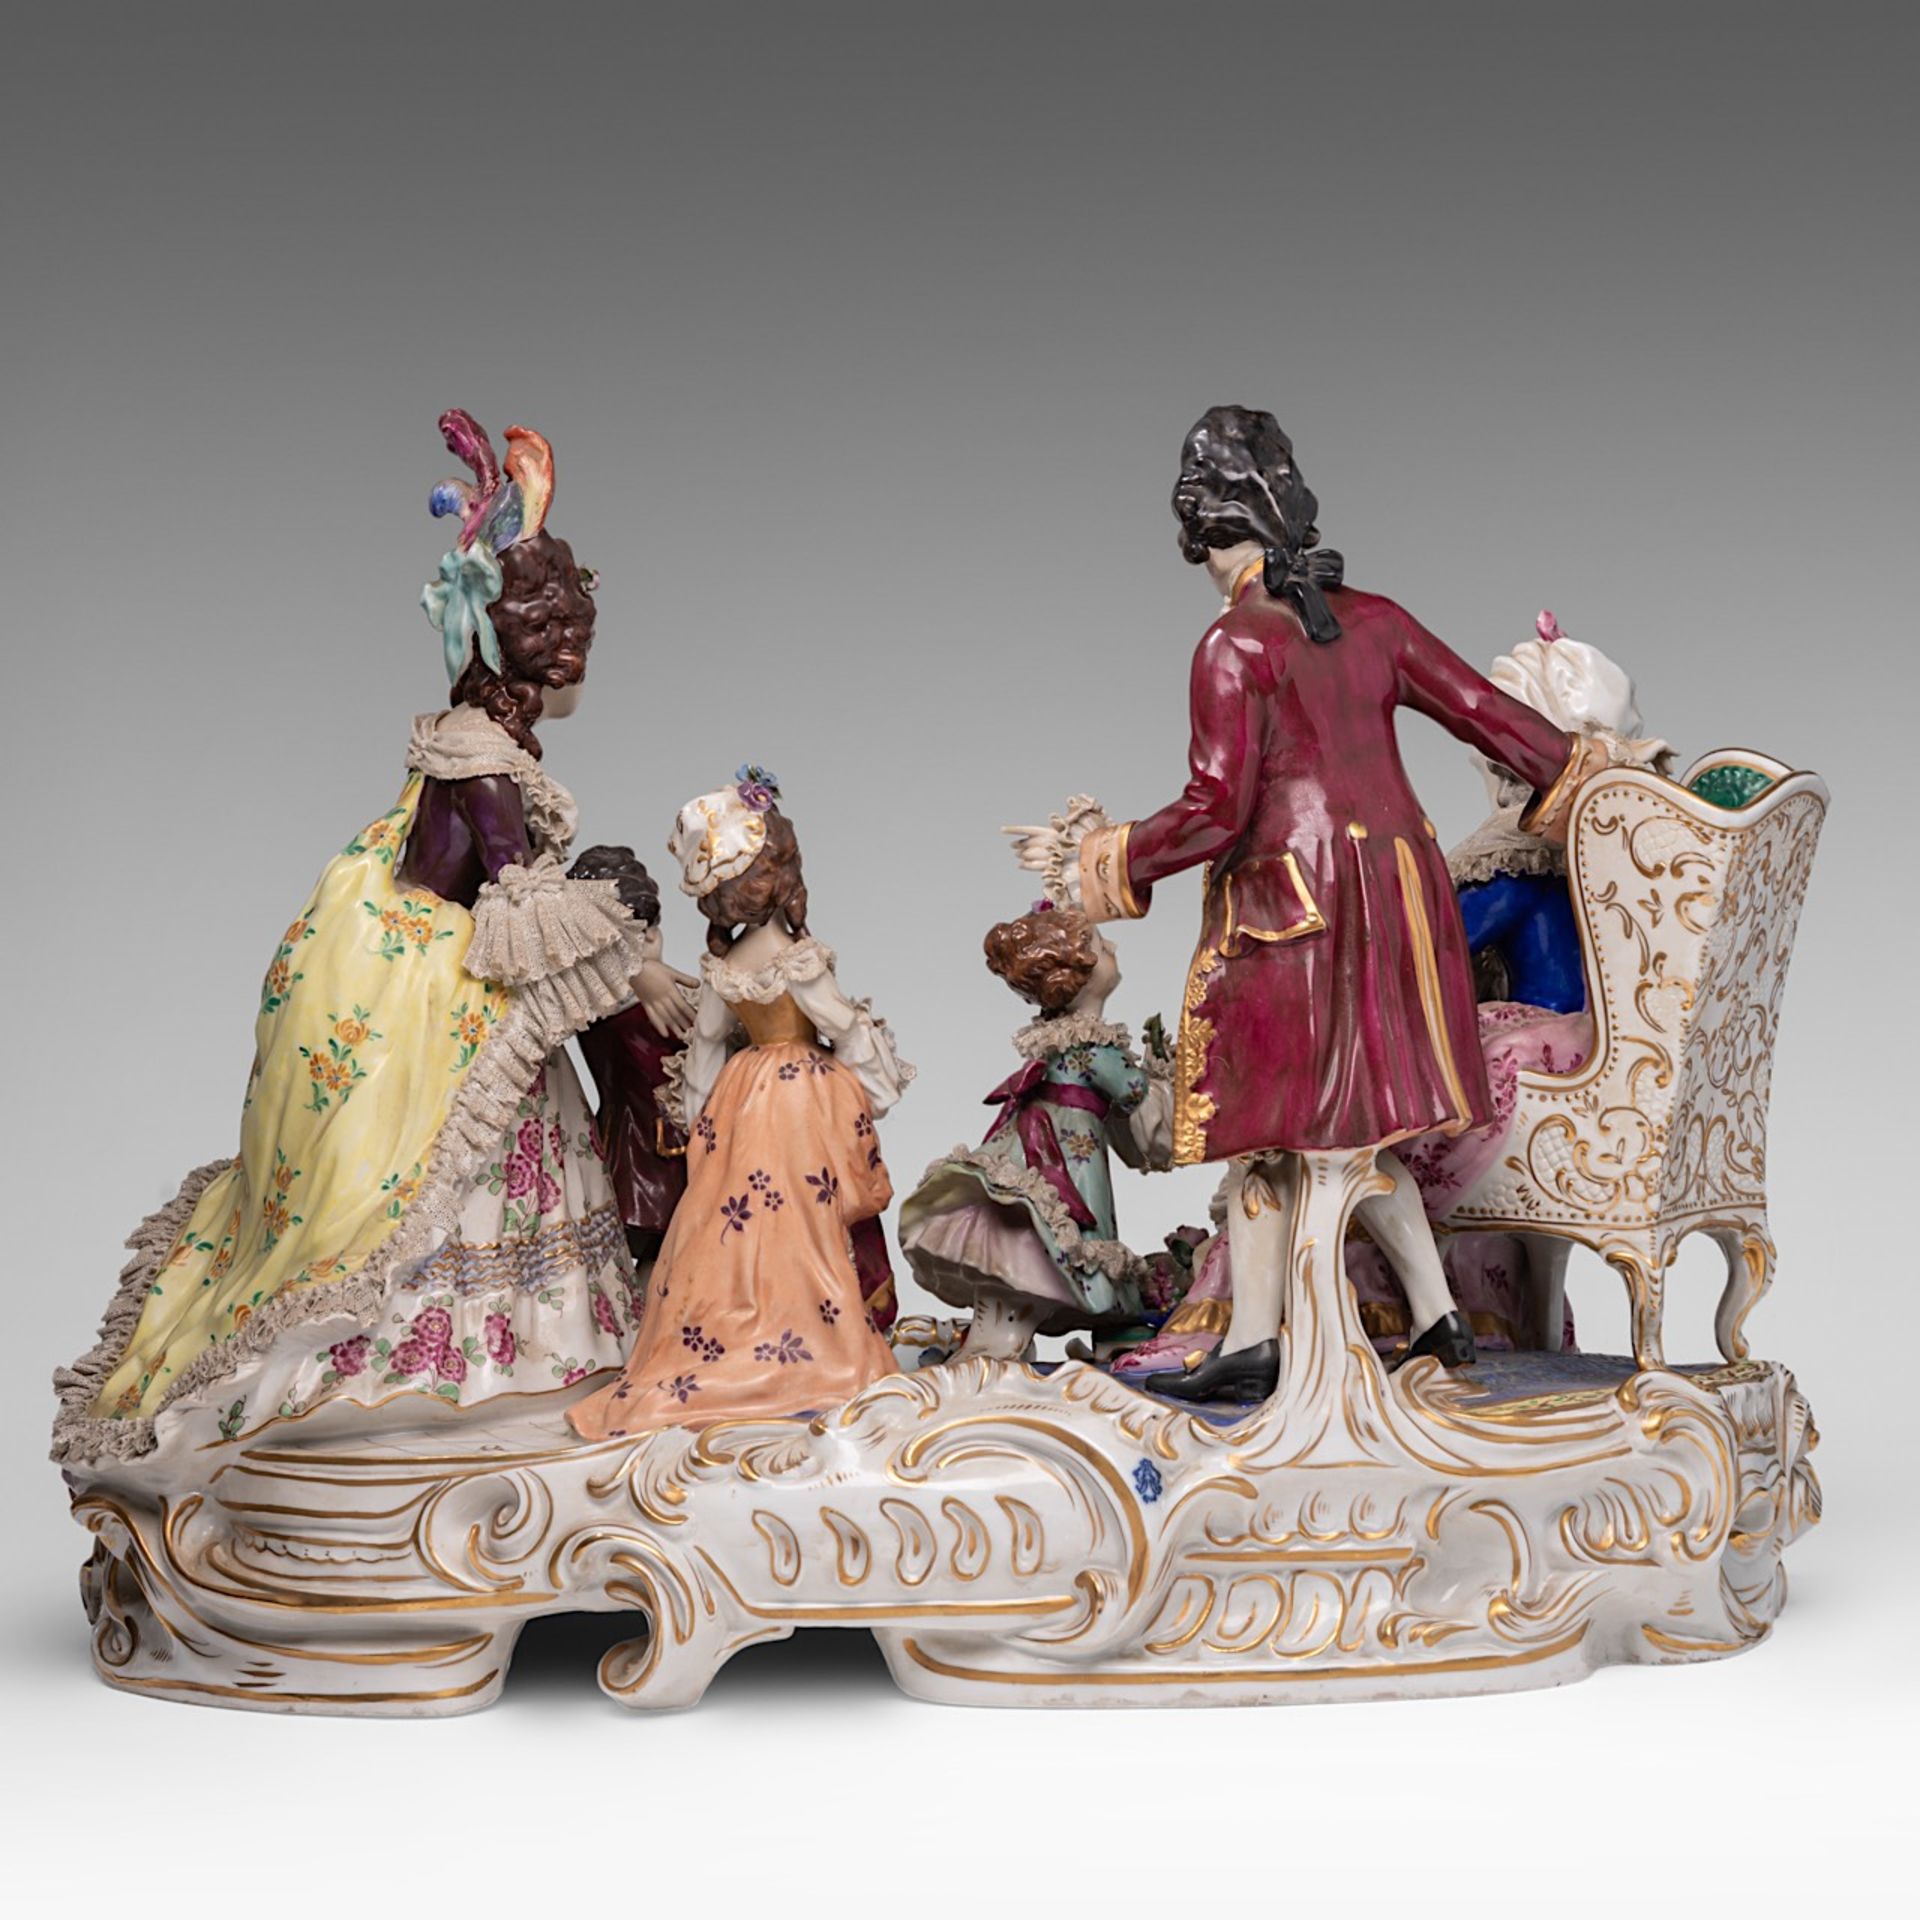 A large Saxony polychrome porcelain group depicting a gallant scene in a Rococo setting, H 40 - W 55 - Image 4 of 15